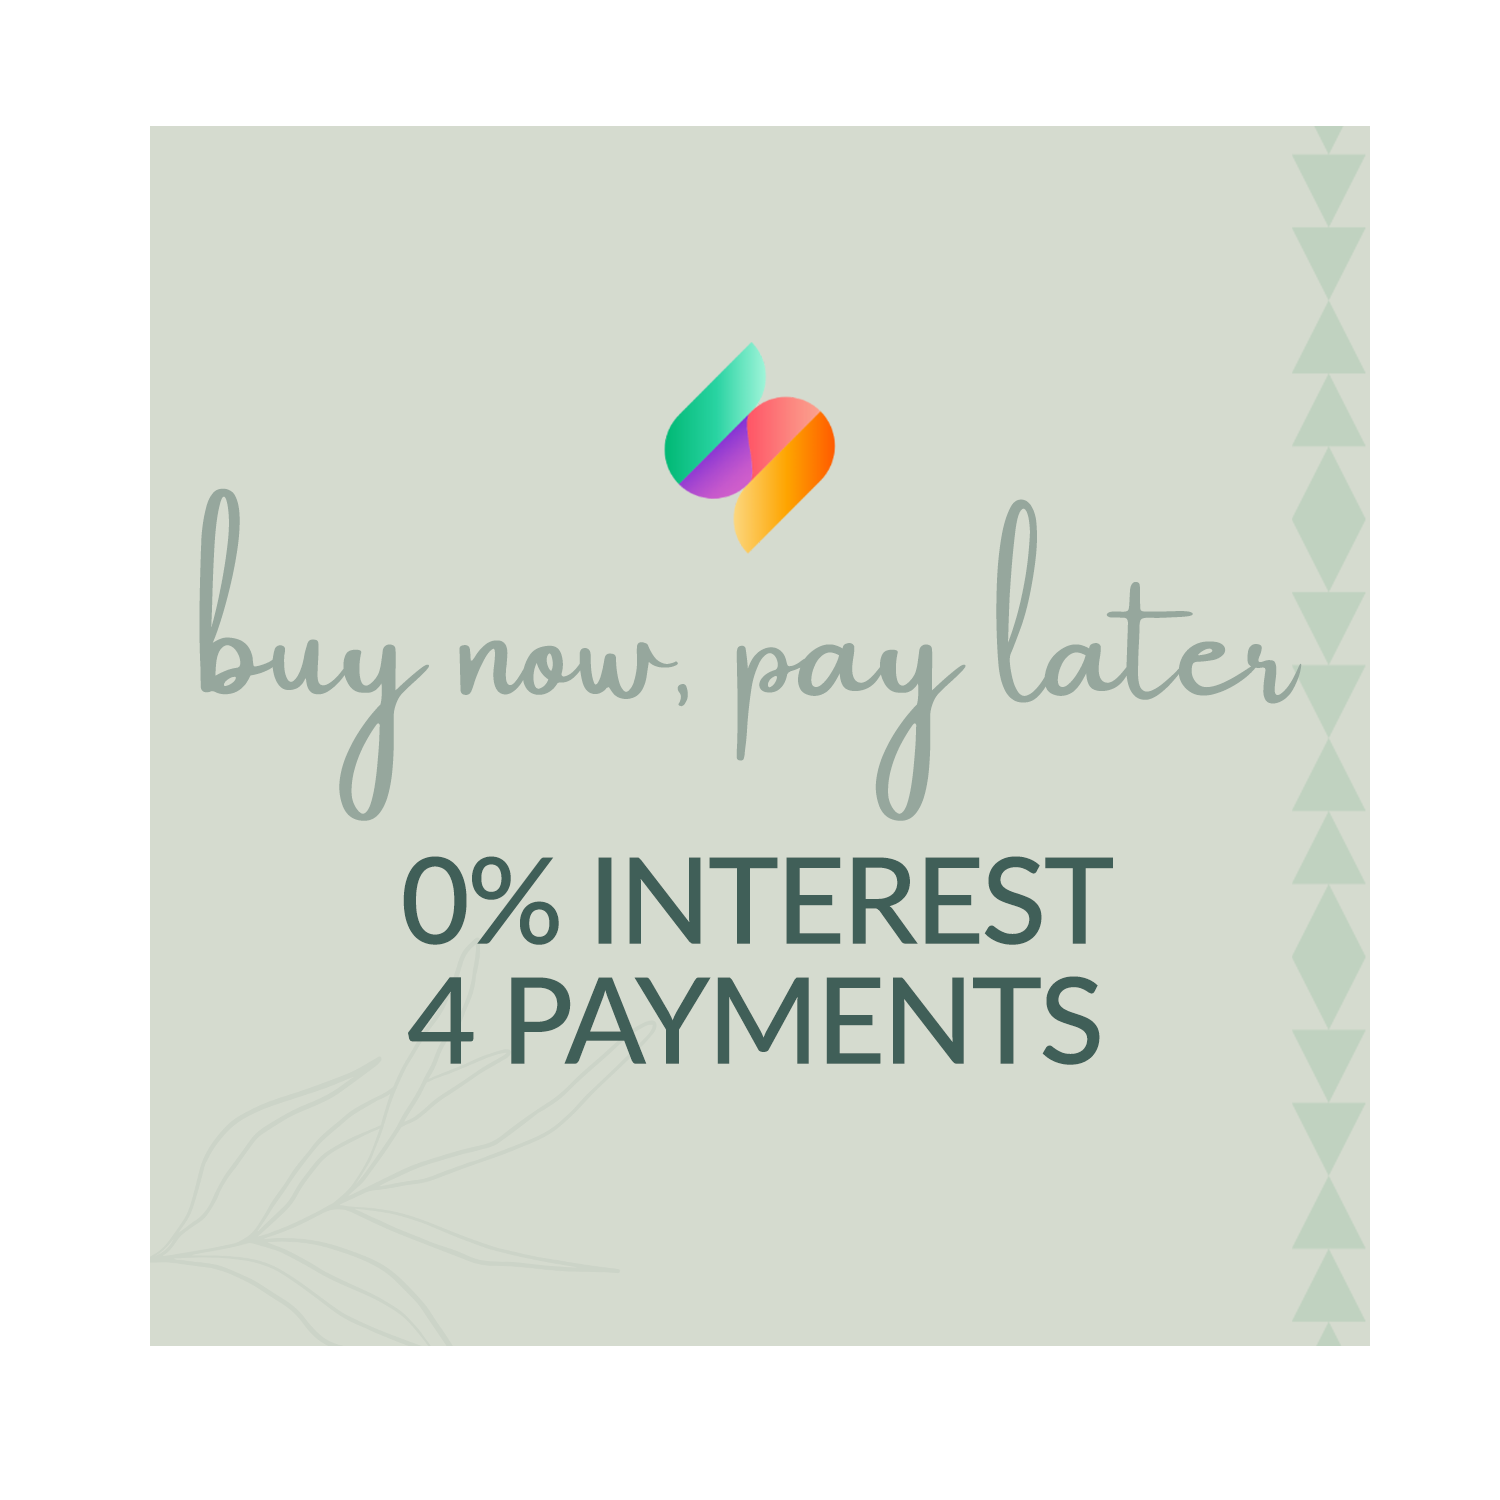 Sezzle: Buy now, pay later 0% interest, 4 payments